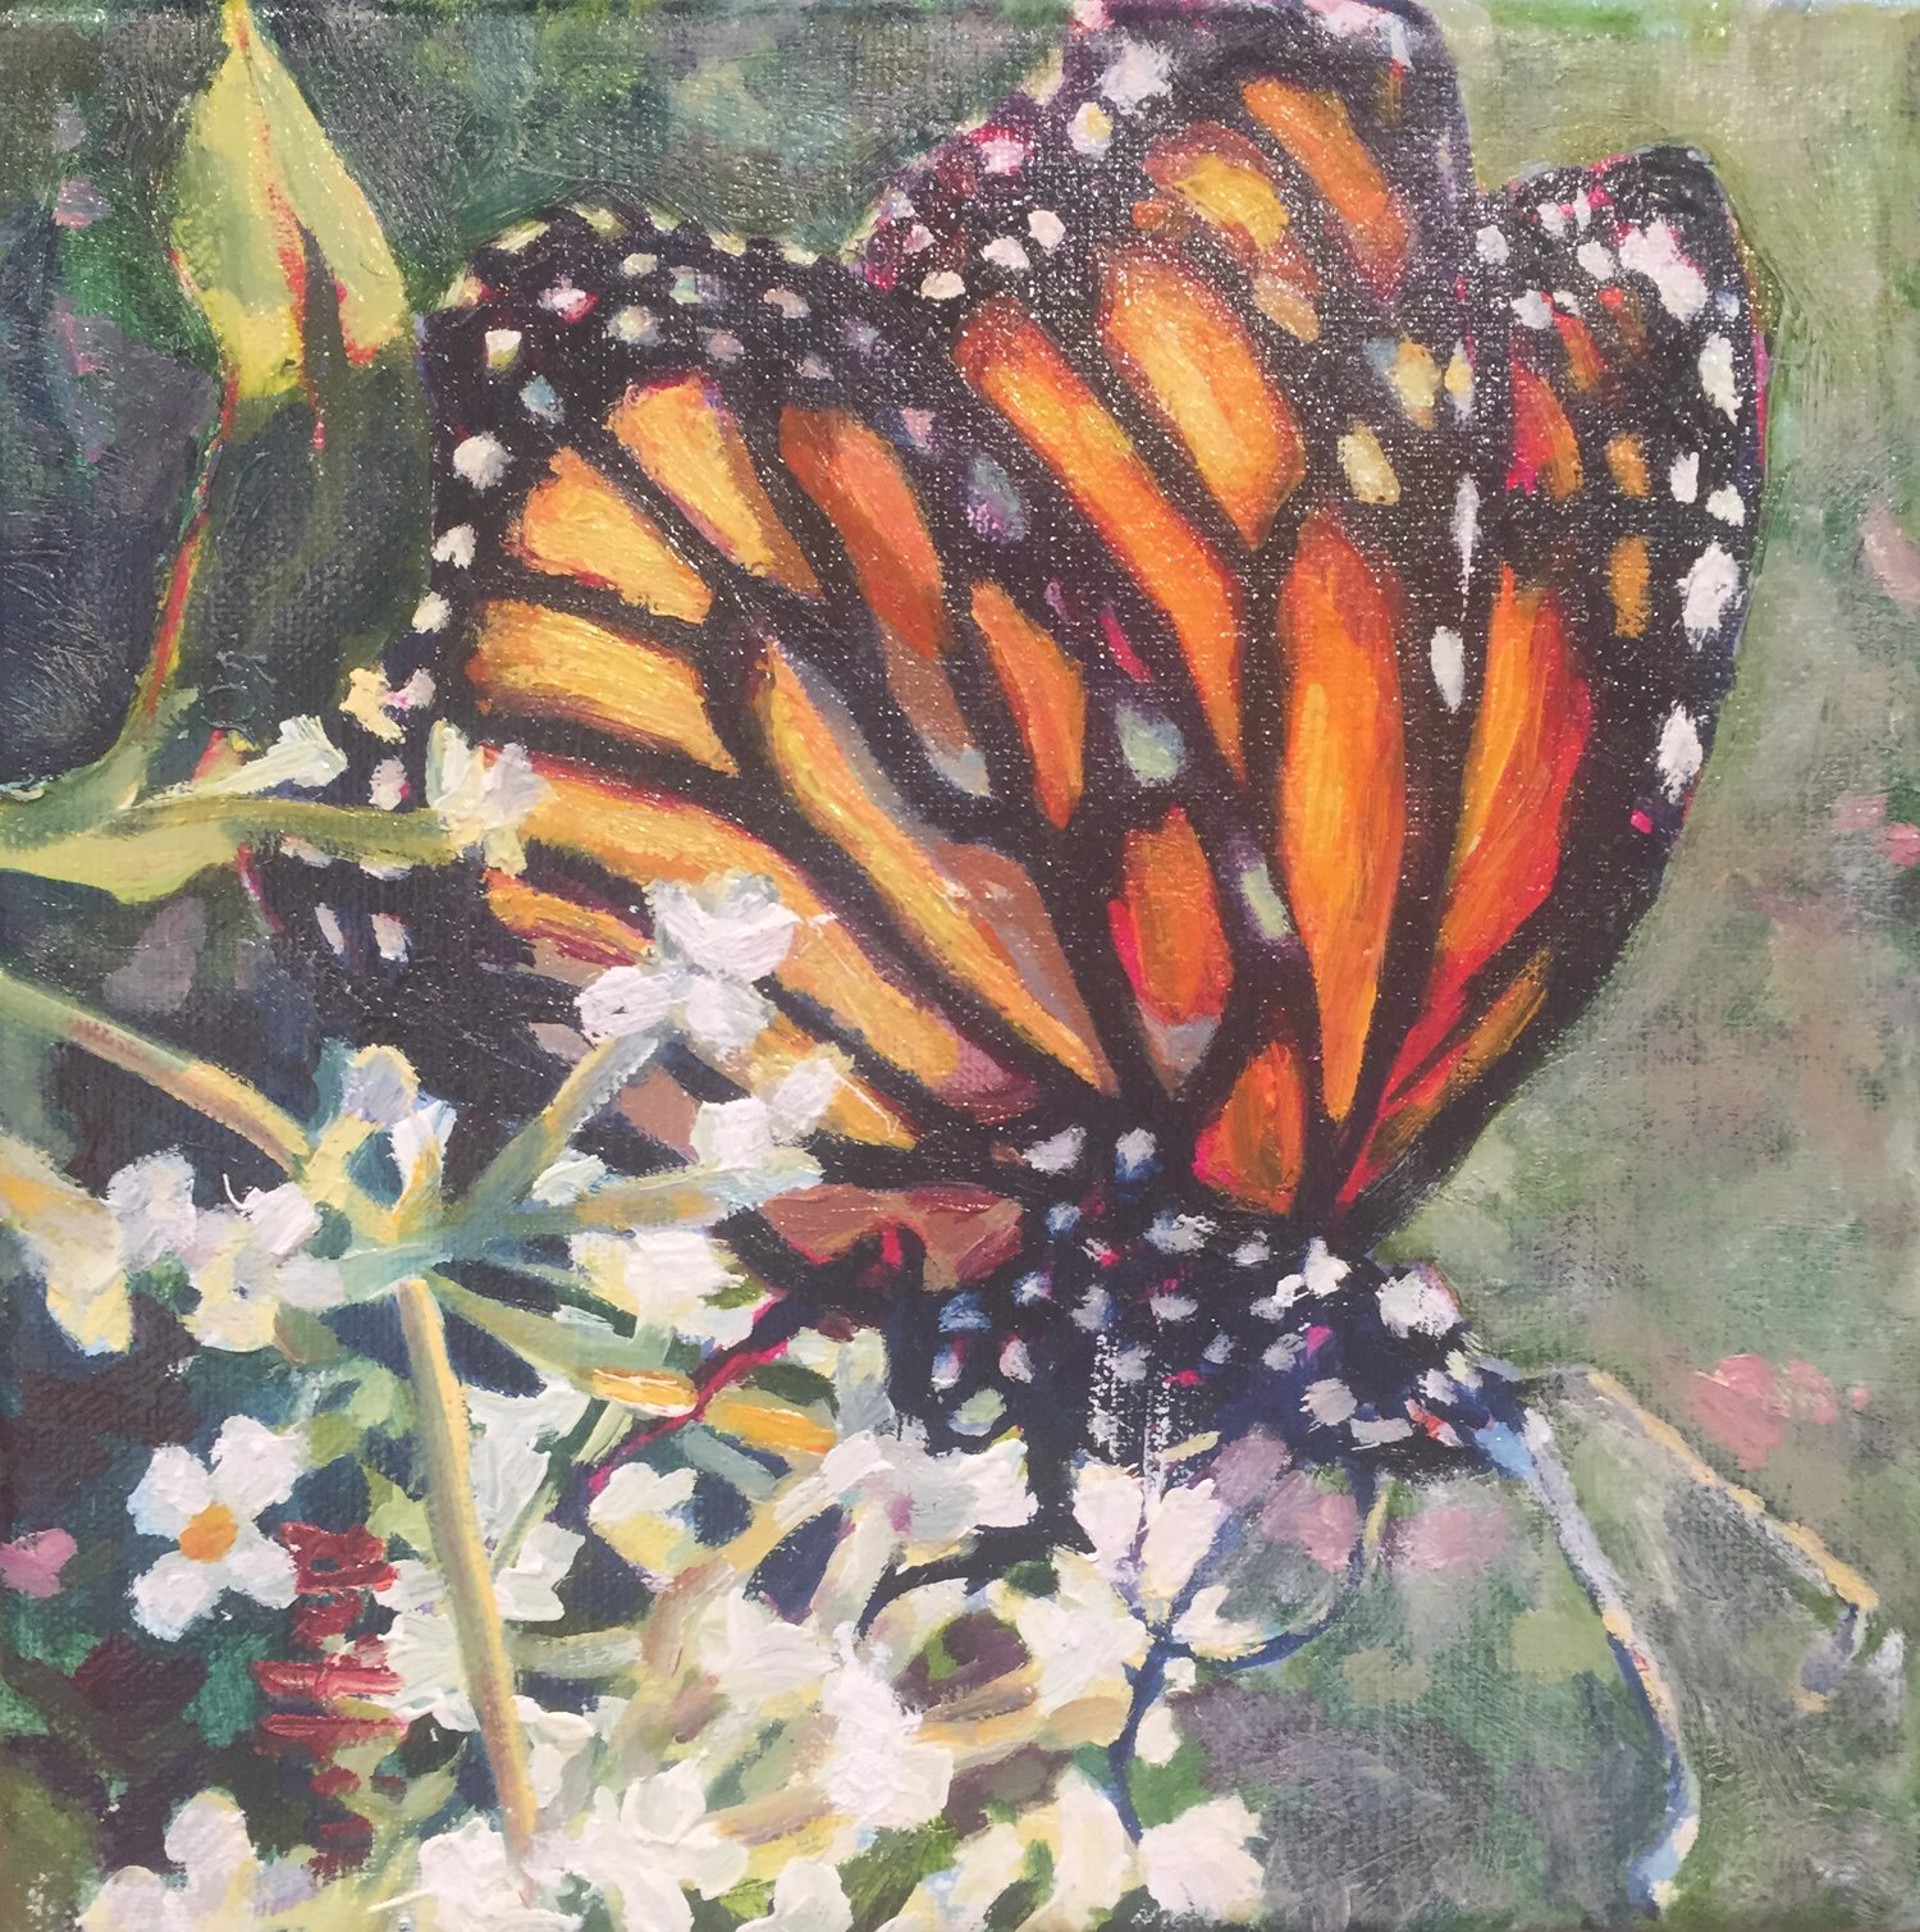 Patricia Griffin Monarch Butterfly on Flower In Oil On Linen, A Contemporary Fine Art Painting and Modern Wildlife Art Piece Available At Gallery Wild